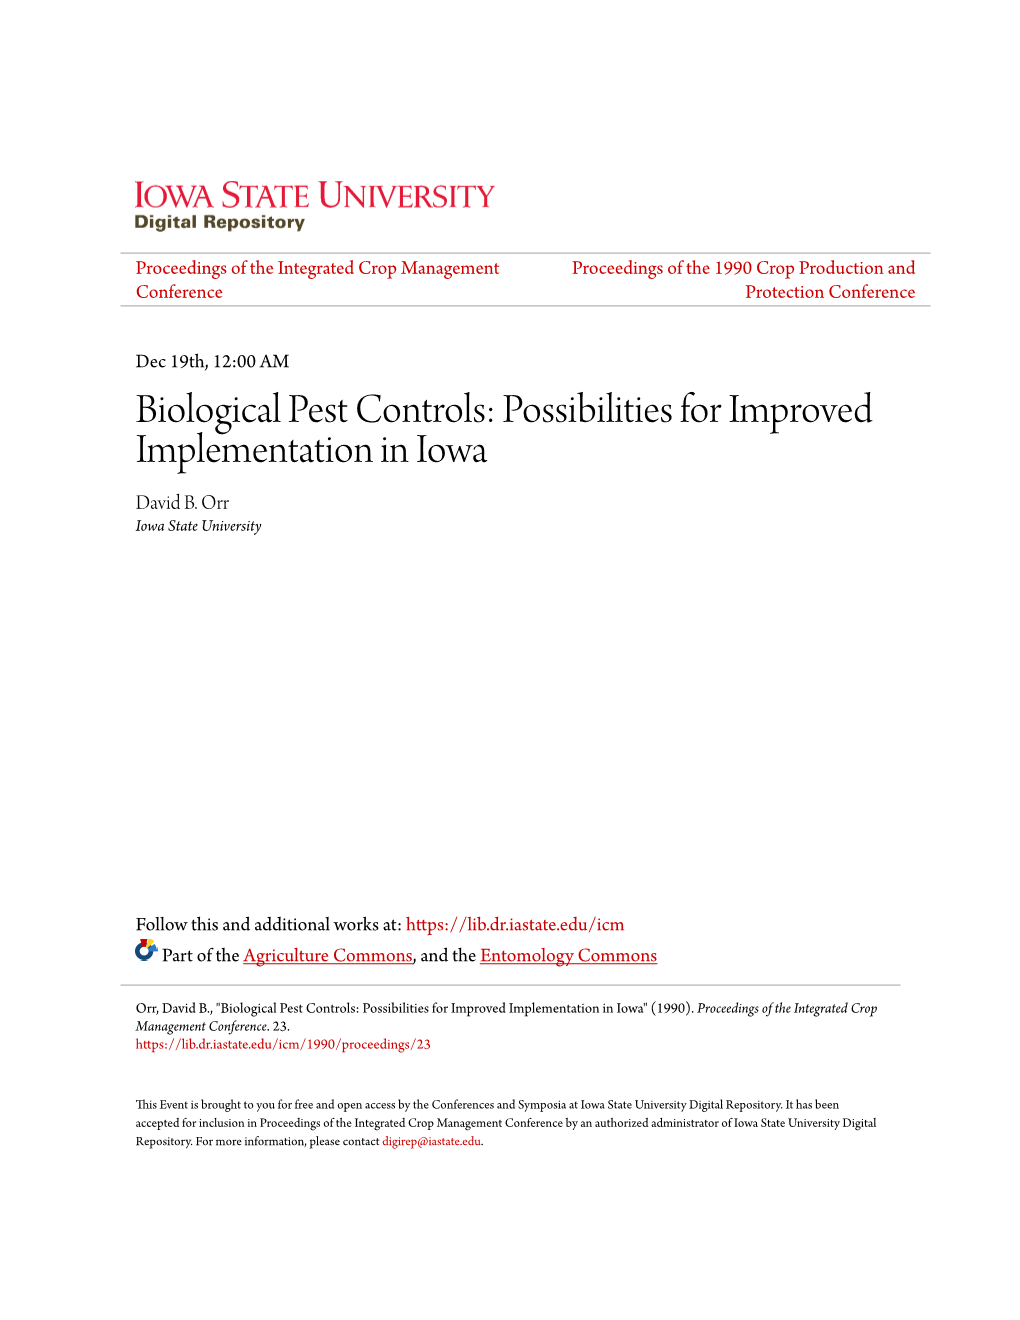 Biological Pest Controls: Possibilities for Improved Implementation in Iowa David B